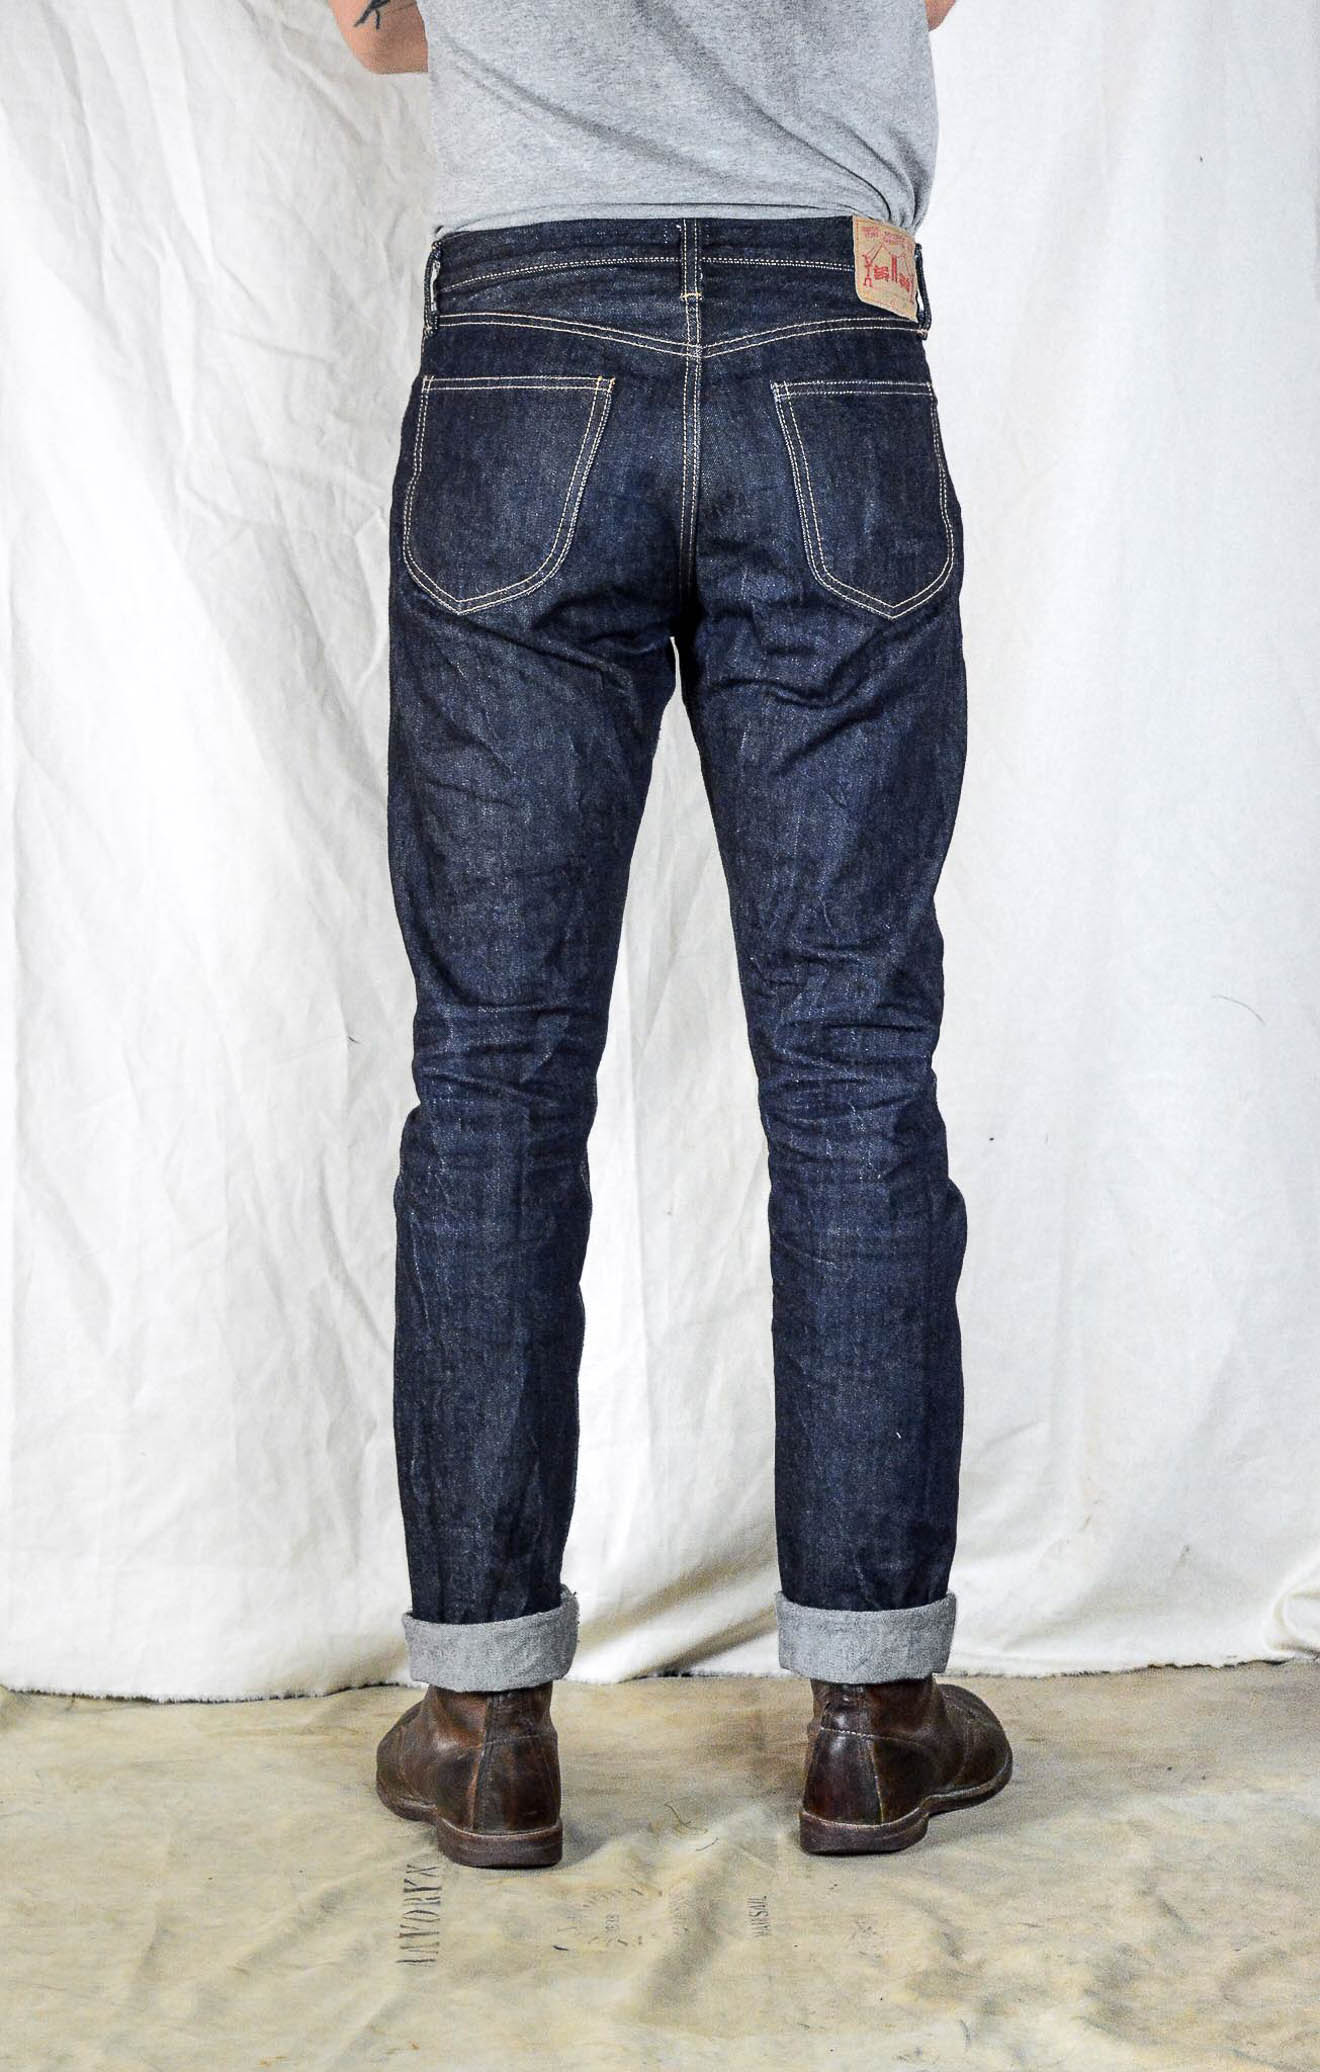 40s Meet 60s In This Collab Between Swedish and Japanese Denimheads ...